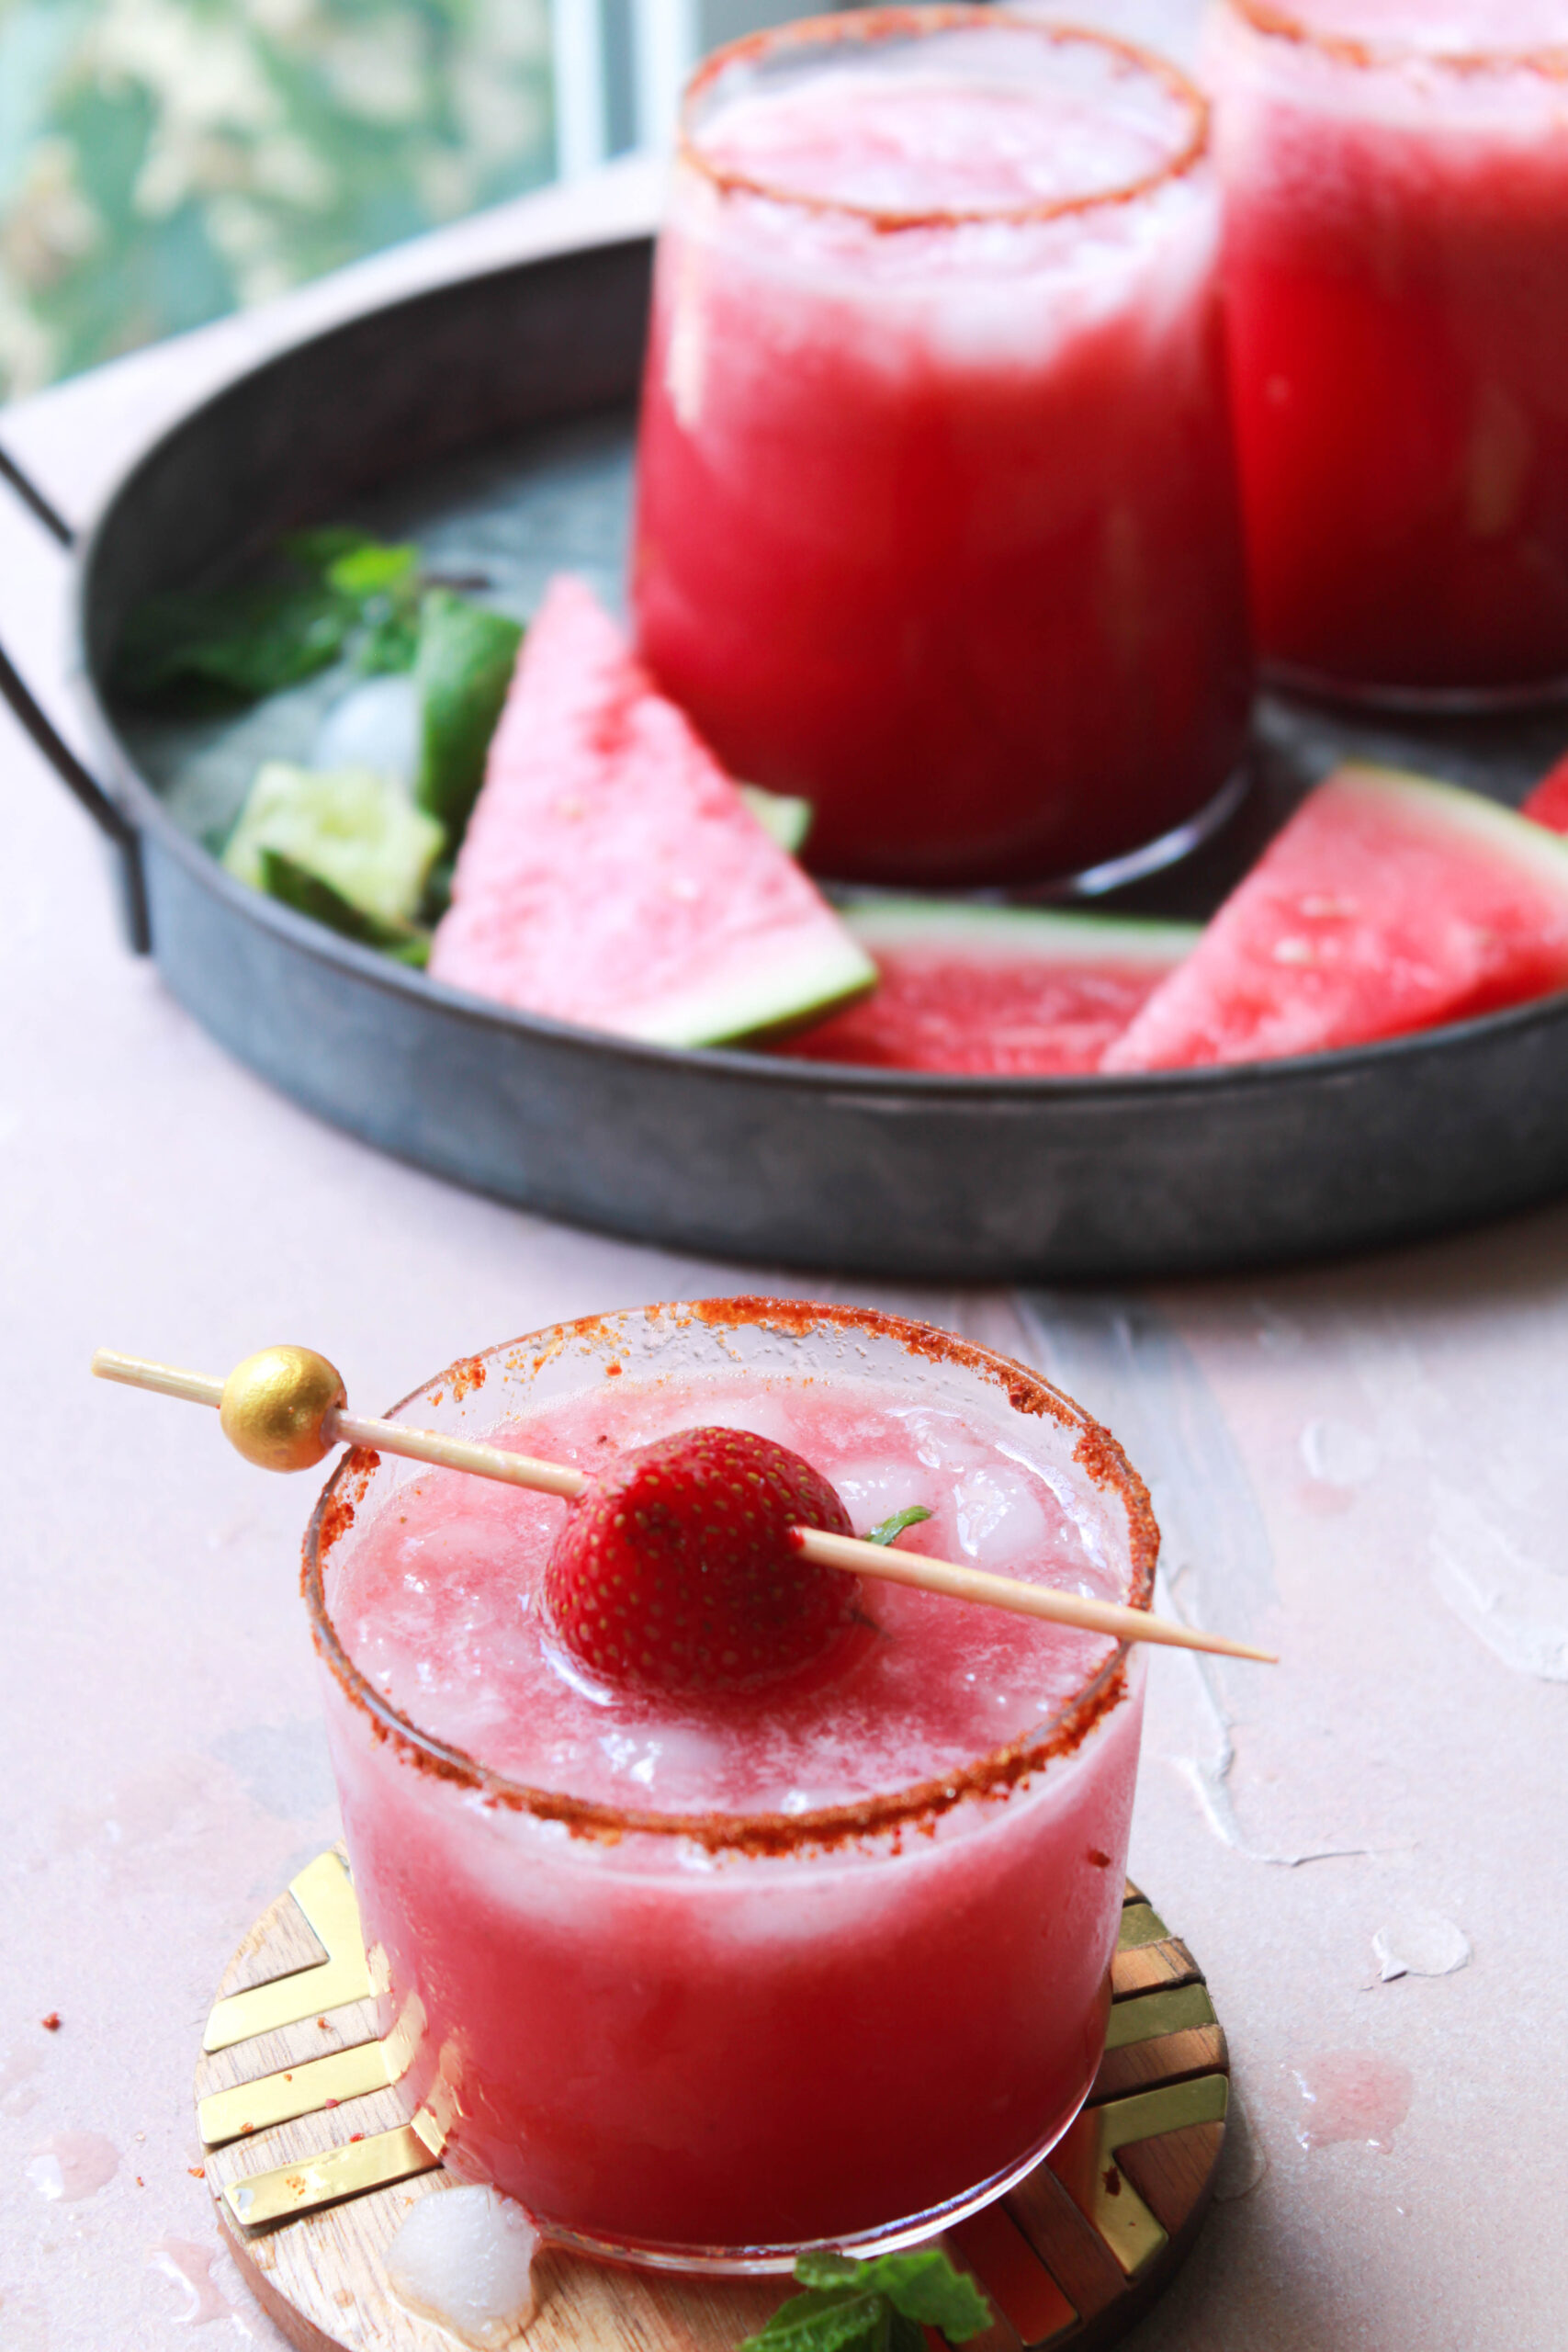 Watermelon and Strawberry Juice